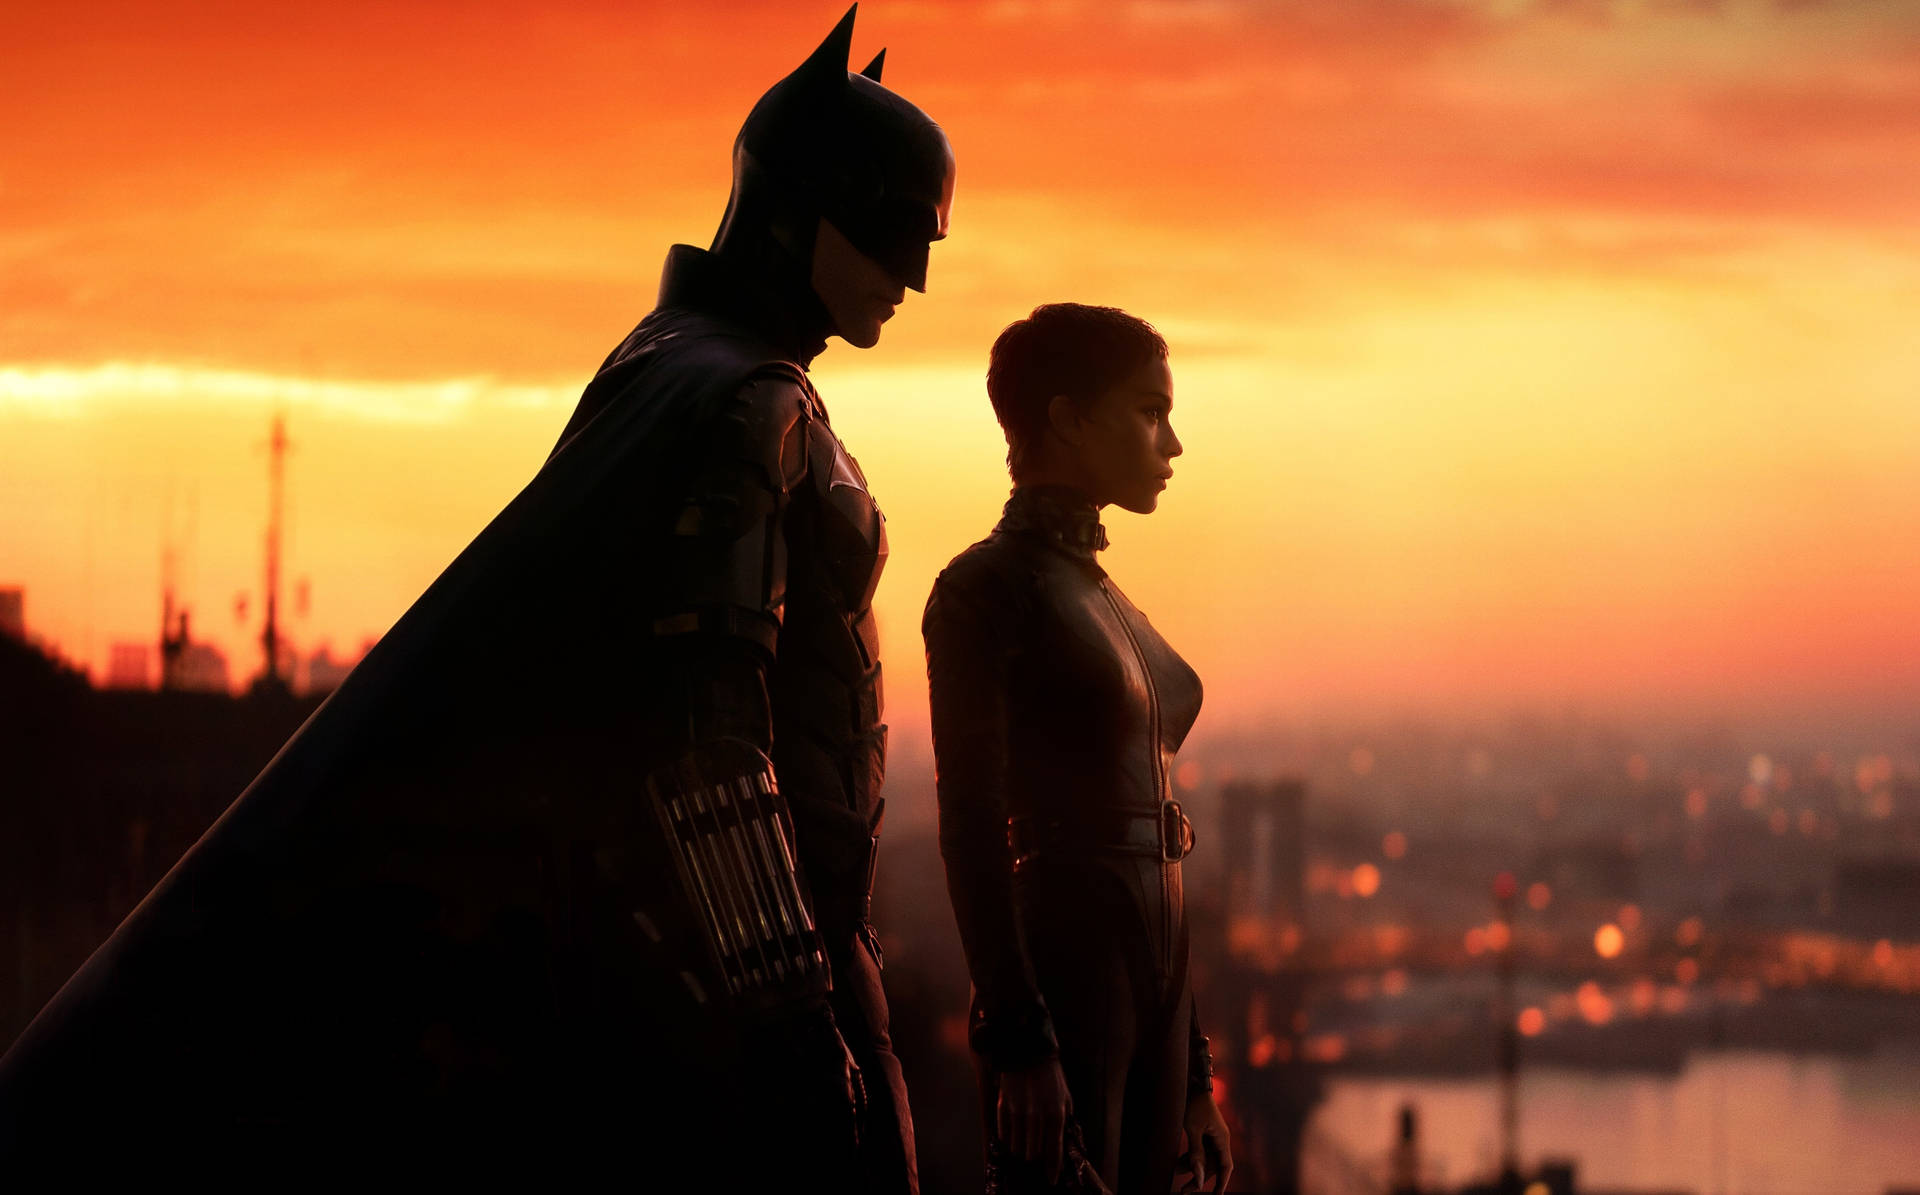 The Batman And Catwoman Sunset Wallpaper